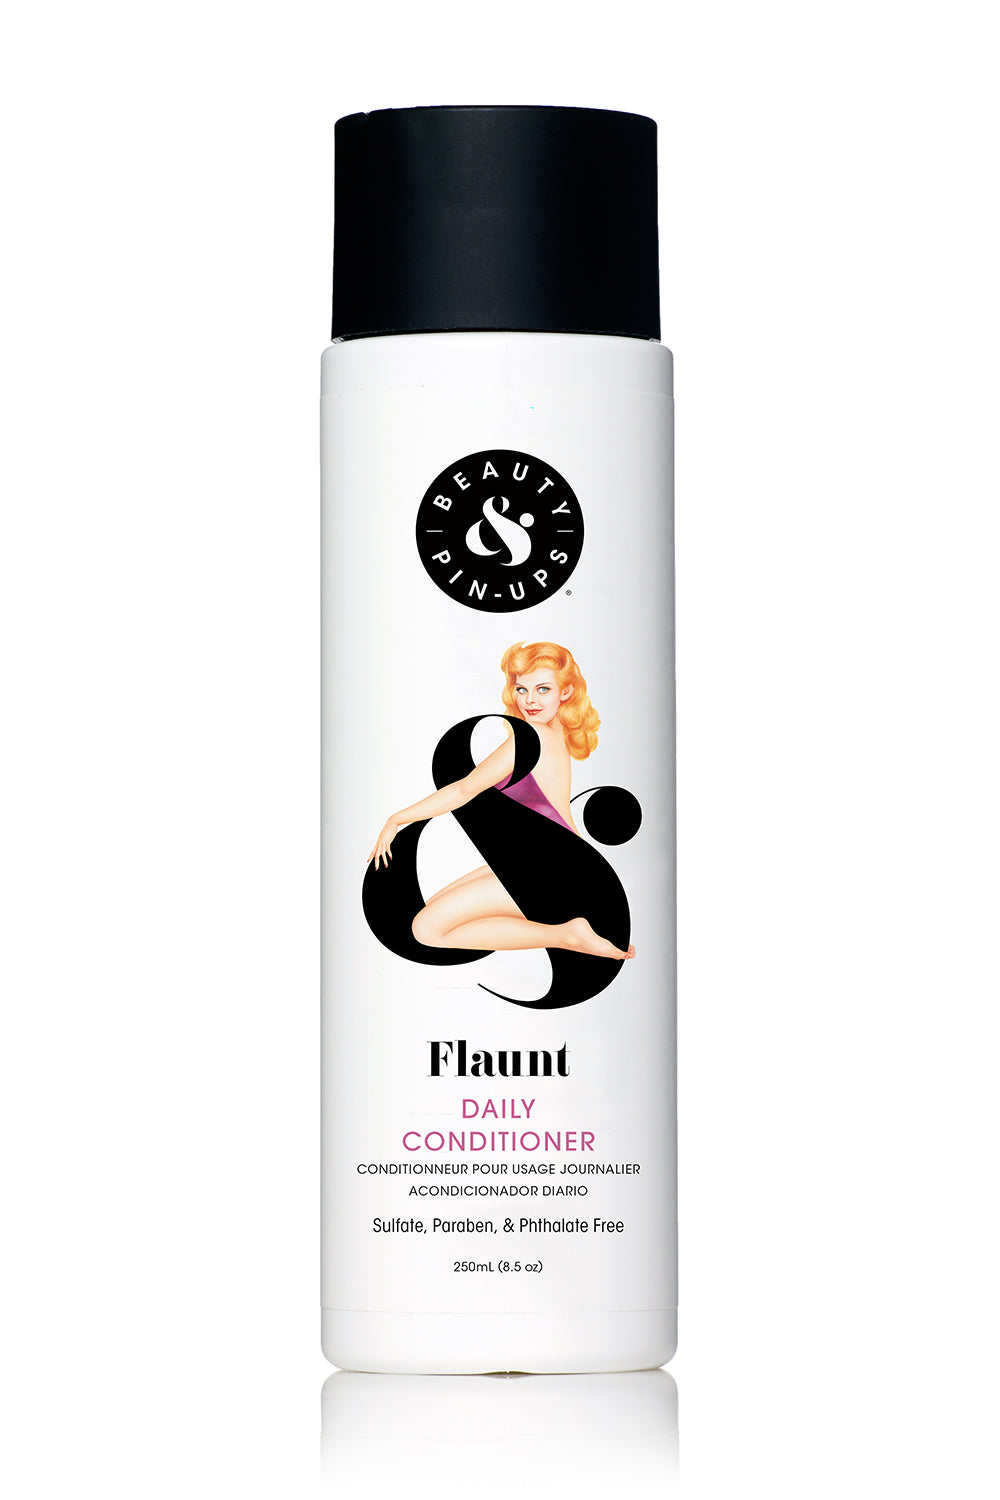 Case of Flaunt Daily Conditioner